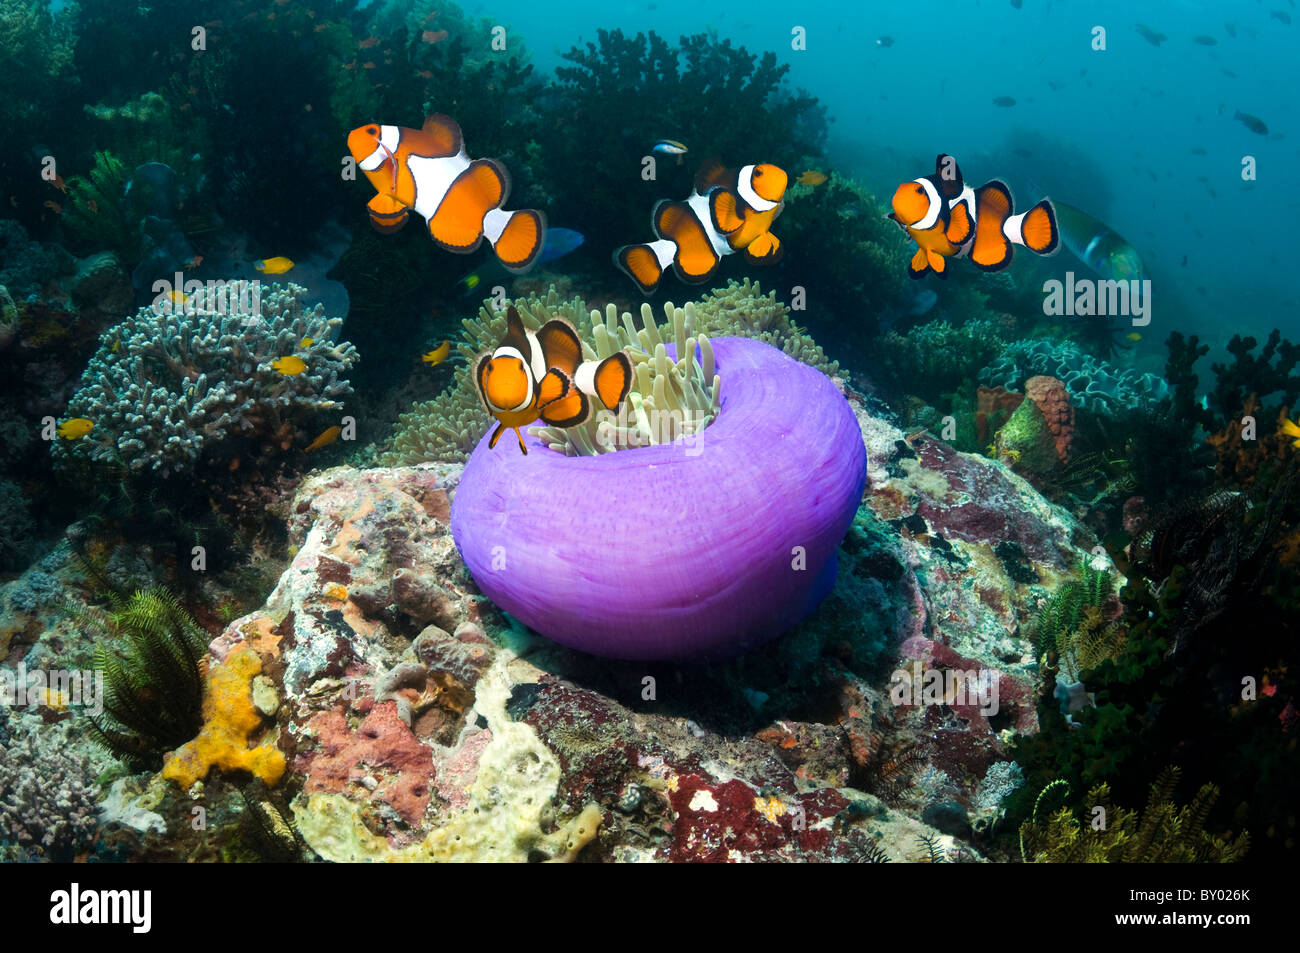 False clown anemonefish (Amphiprion ocellaris) with anemone. Indonesia. Stock Photo